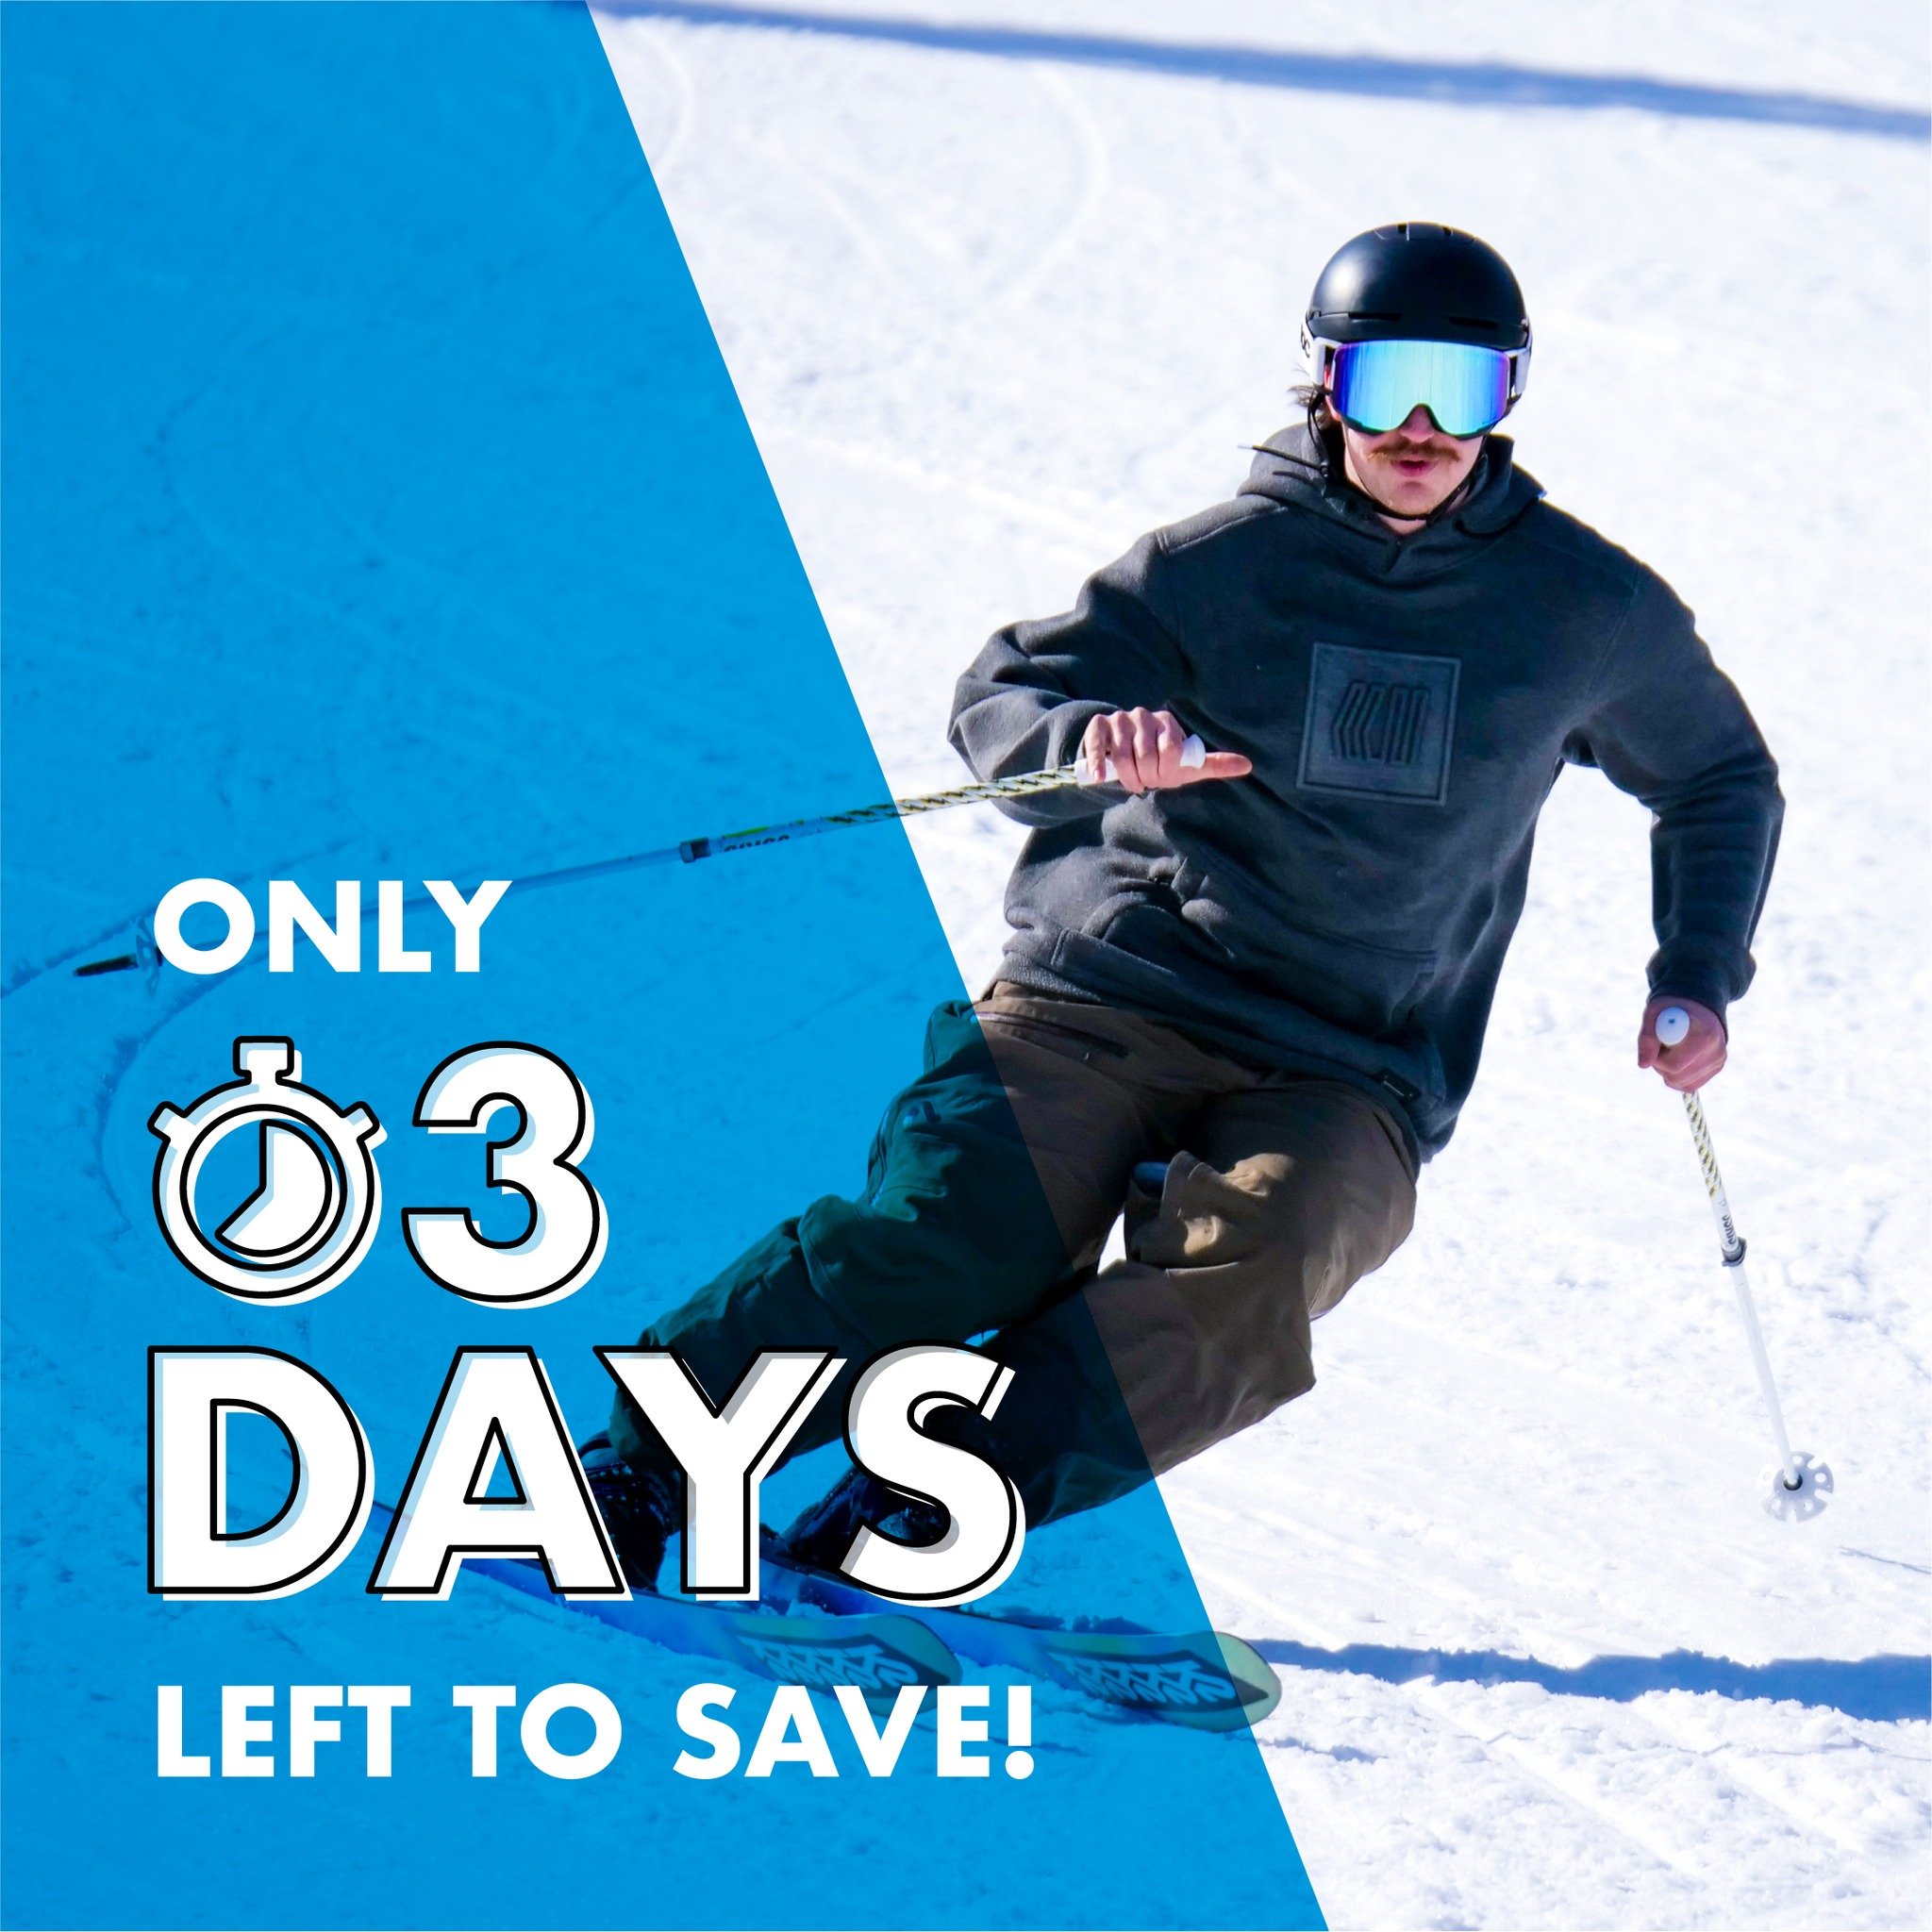 Act now or miss out on the low prices! Our season pass sale ends in just 3 days; as always, kids ski free with the purchase of an adult plus pass! ⛷️ Winter adventures await, so don't miss the deadline. 

Learn more now with the 🔗 in our bio!